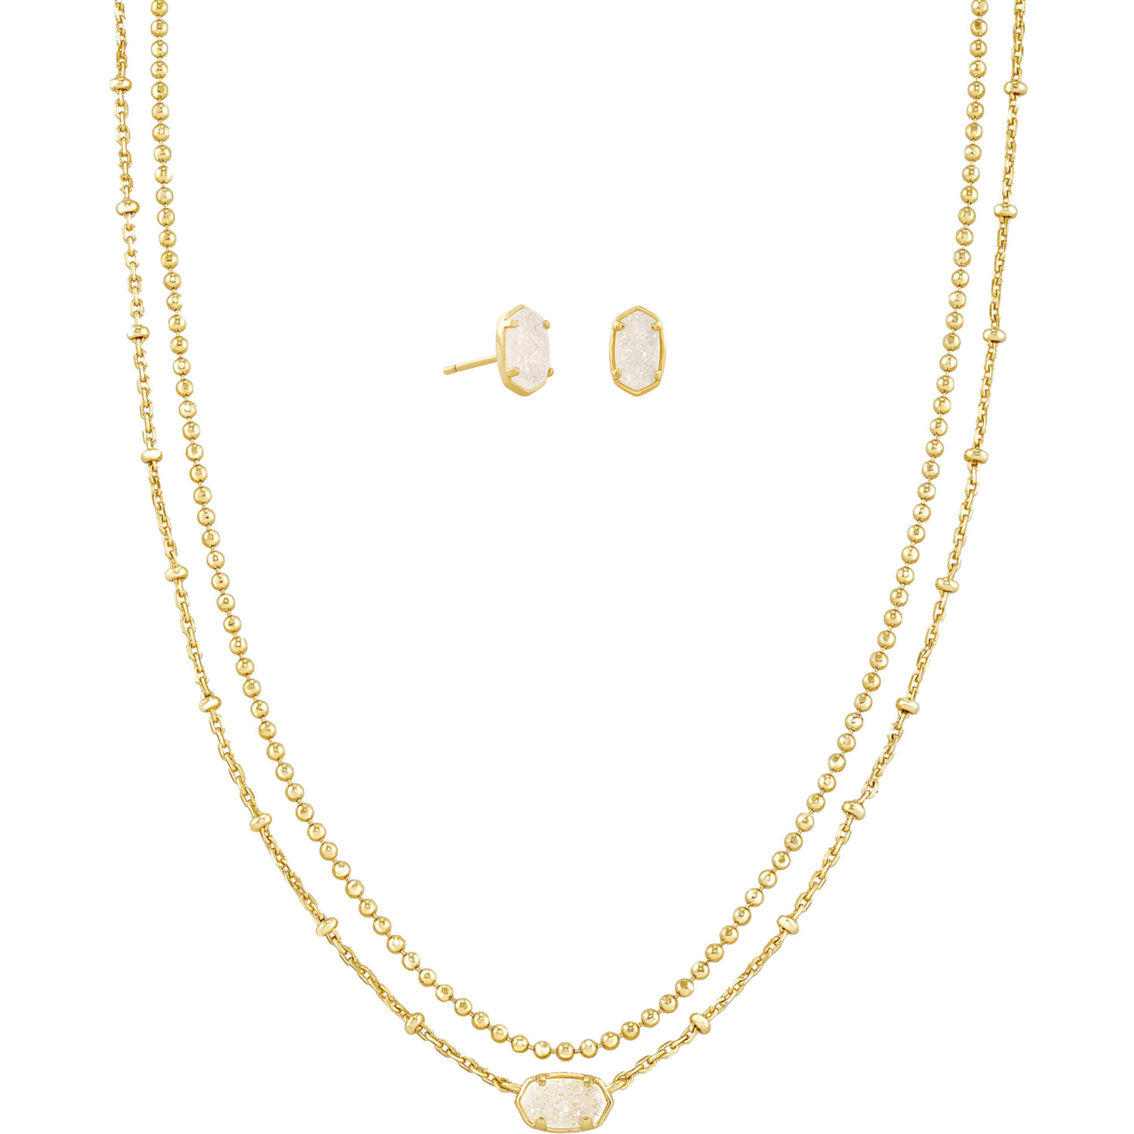 Kendra Scott Emilie Multi- Strand Necklace and Stud Earrings Gift Set